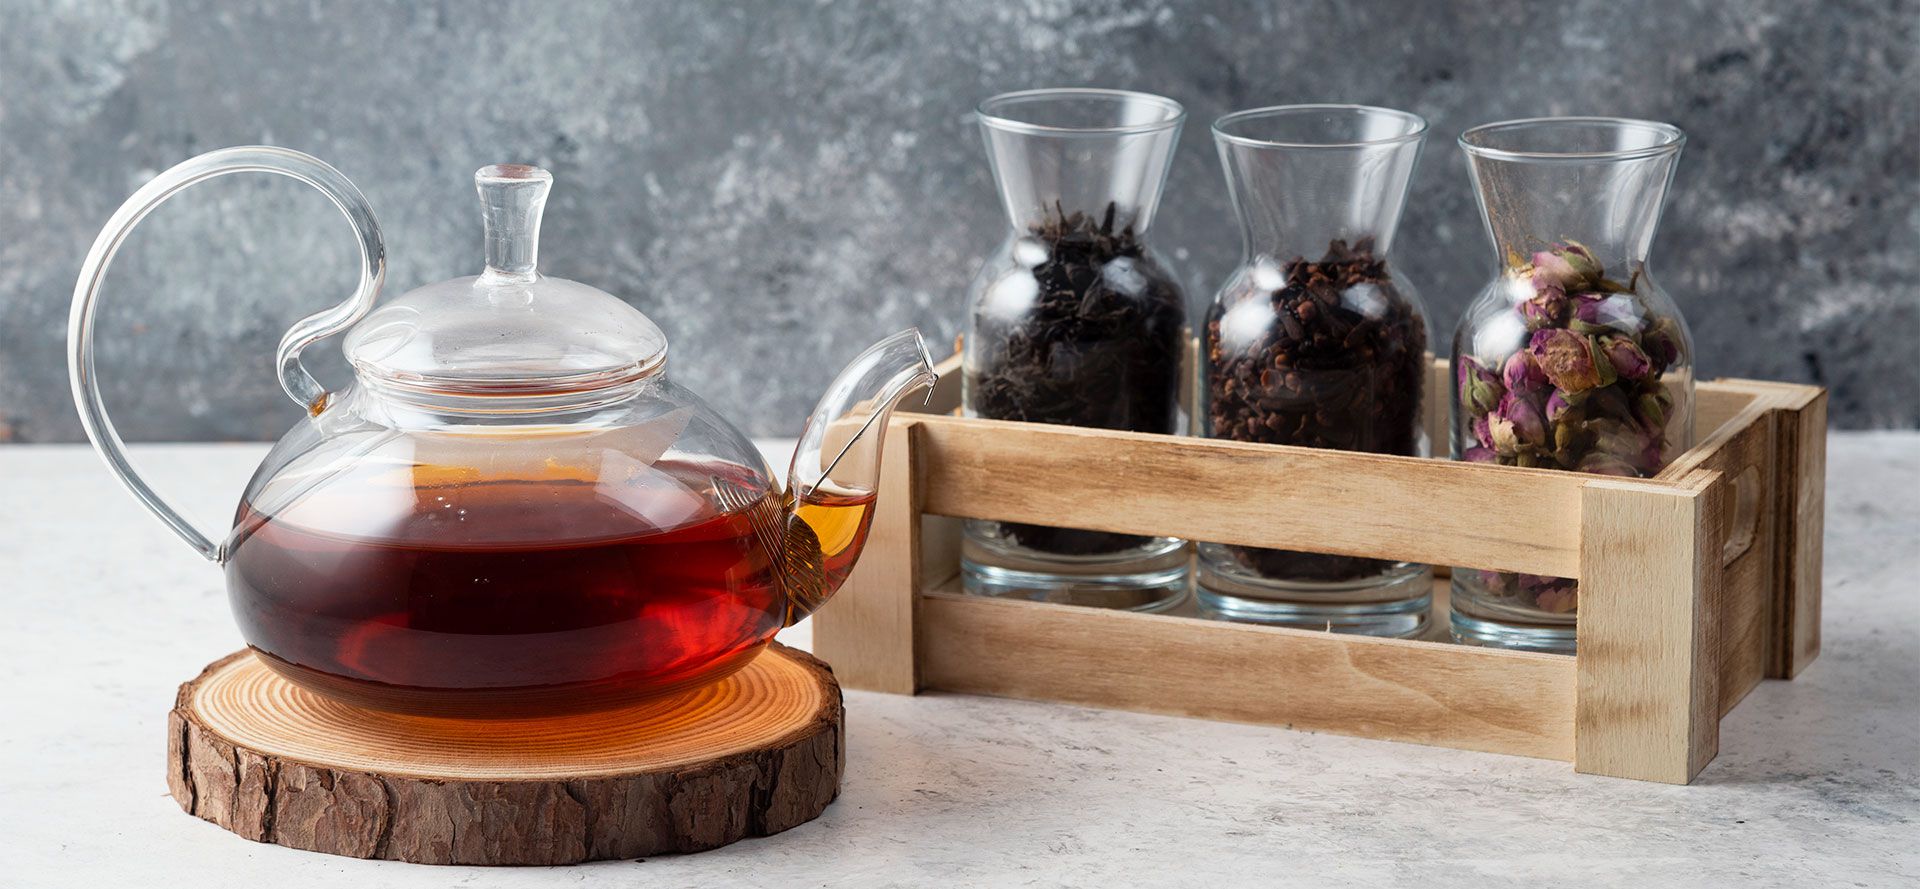 Brewed Black Tea In The Glass Teapot.